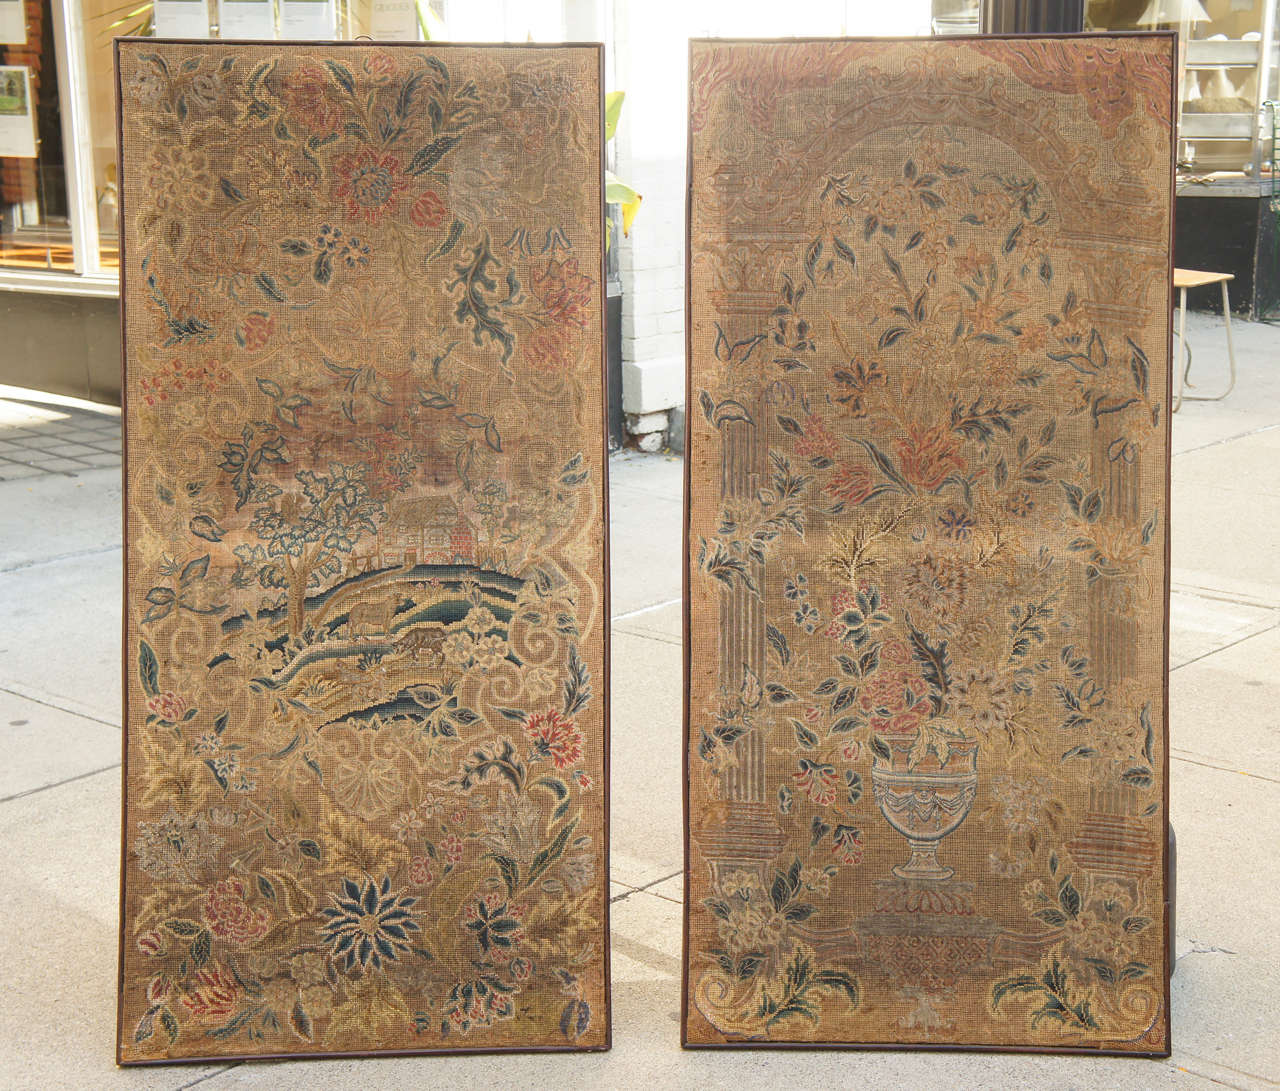 This lovely  pair of  needlework panels represent a women's  labor and  command at home decor which would have been important in establishing her social position. Worked in deep blues, reds ,ocher's and light greens the panels conform to stylish